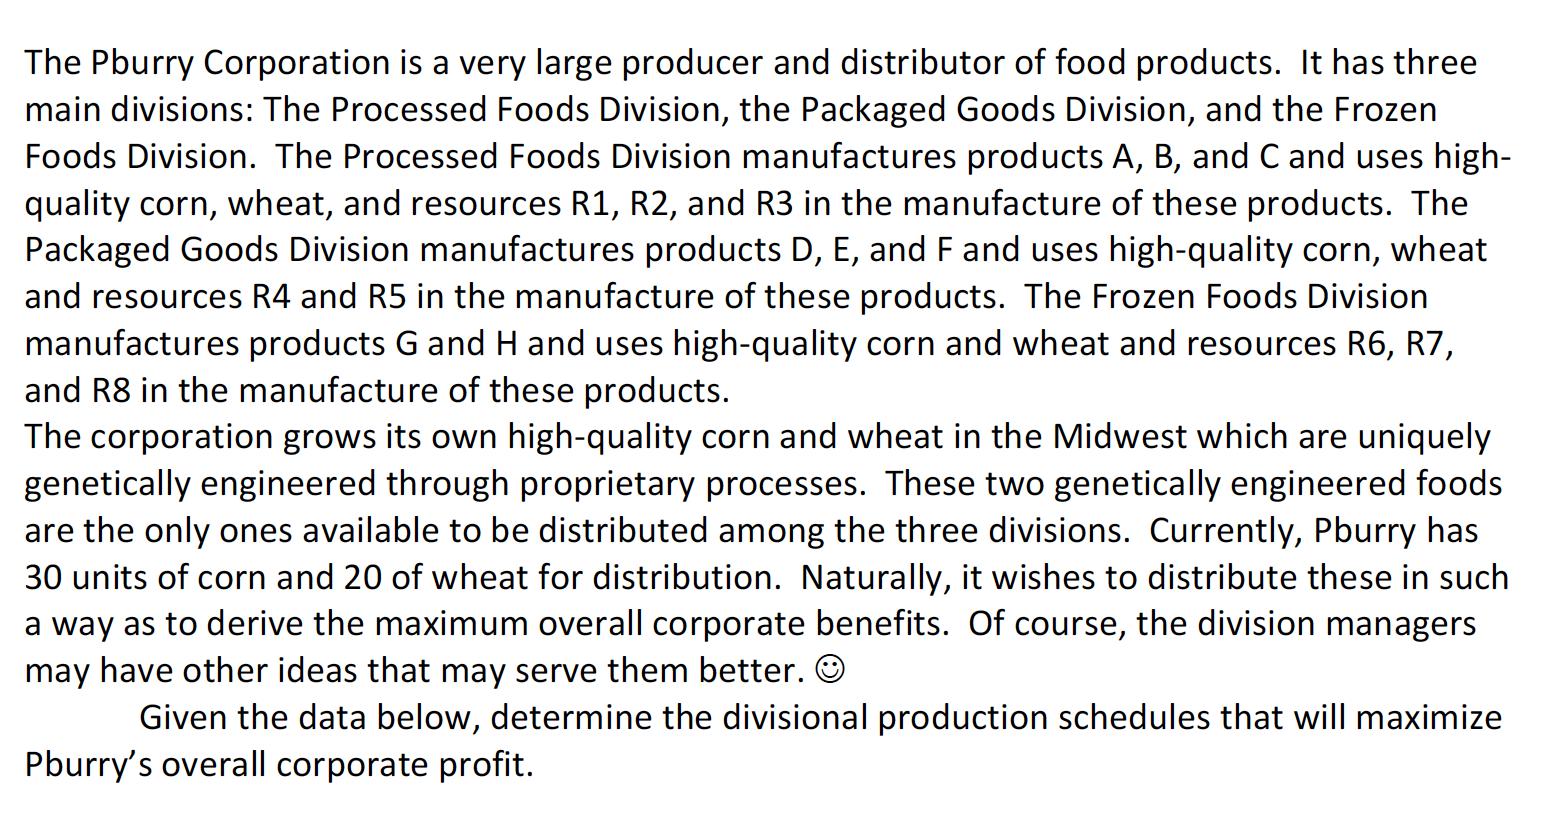 The Pburry Corporation is a very large producer and distributor of food products. It has three main